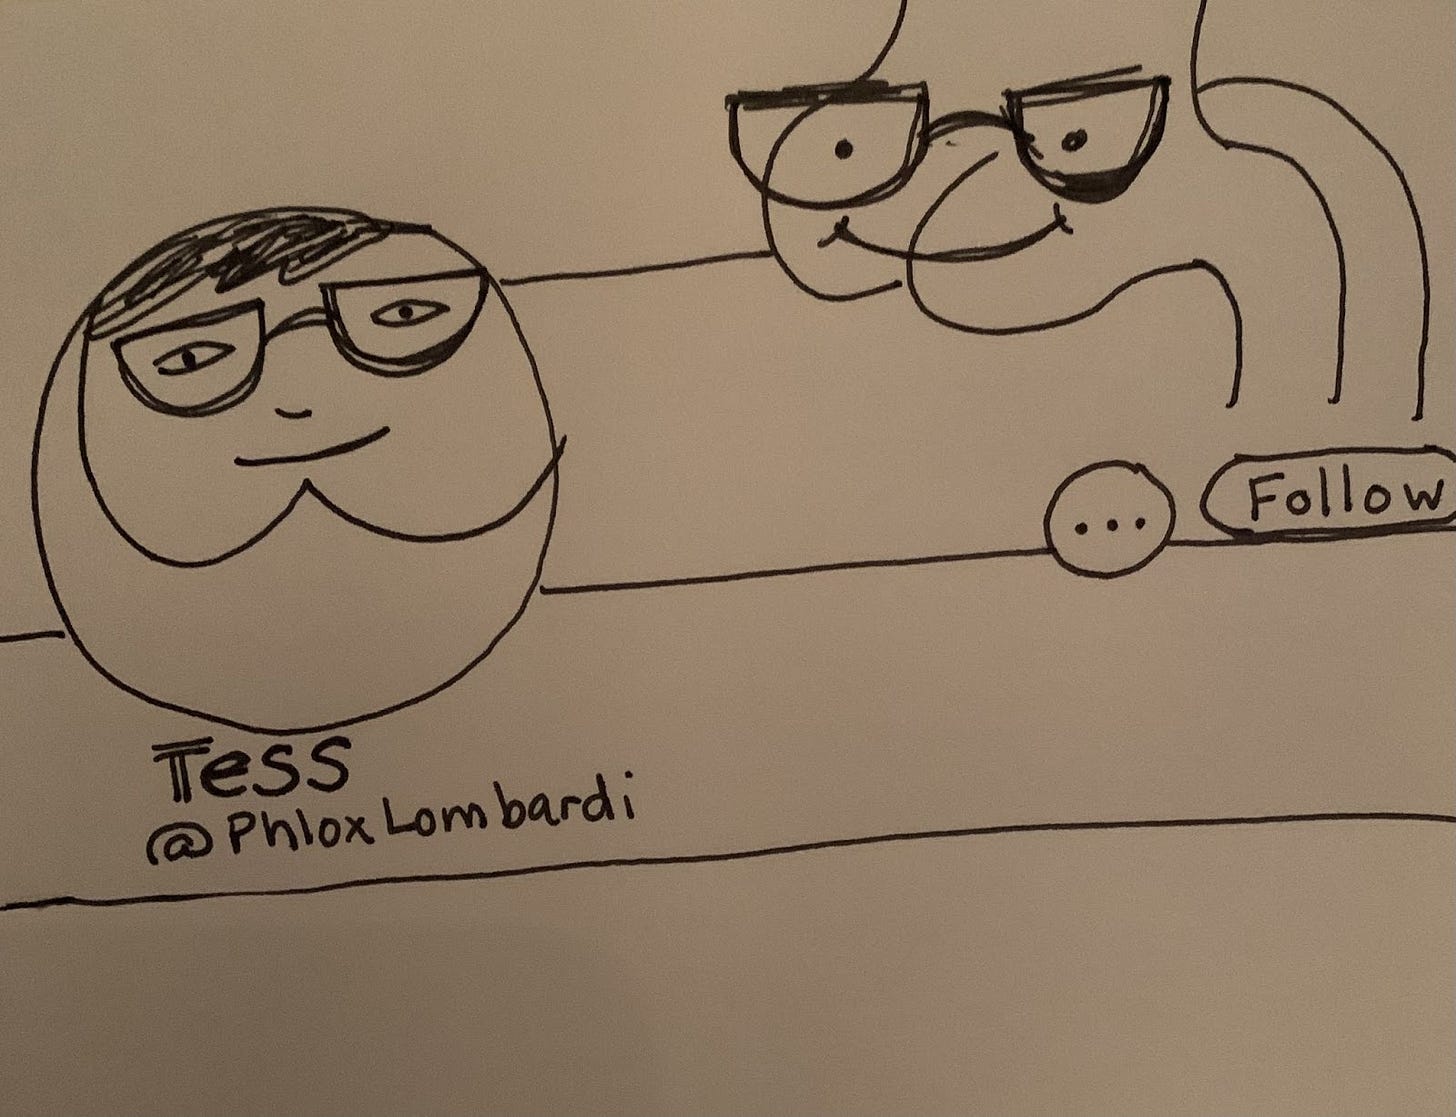 Sketch of a Twitter page with poorly-drawn butt face avatar and butt header